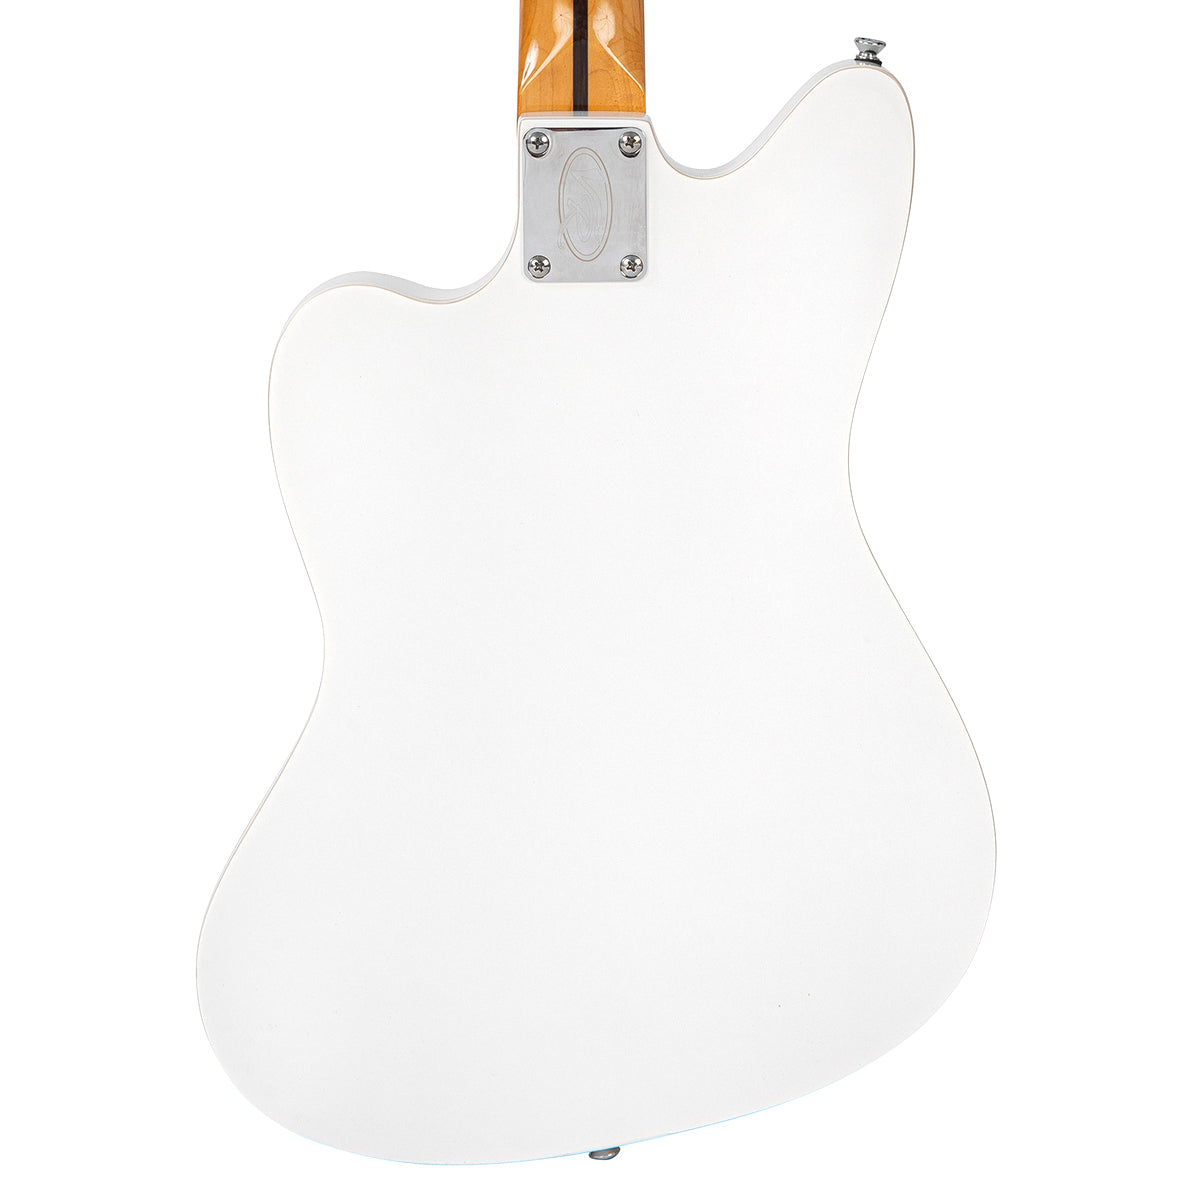 Vintage REVO Series 'Surfmaster Thinline' Twin Electric Guitar ~ Arctic White, Electric Guitars for sale at Richards Guitars.